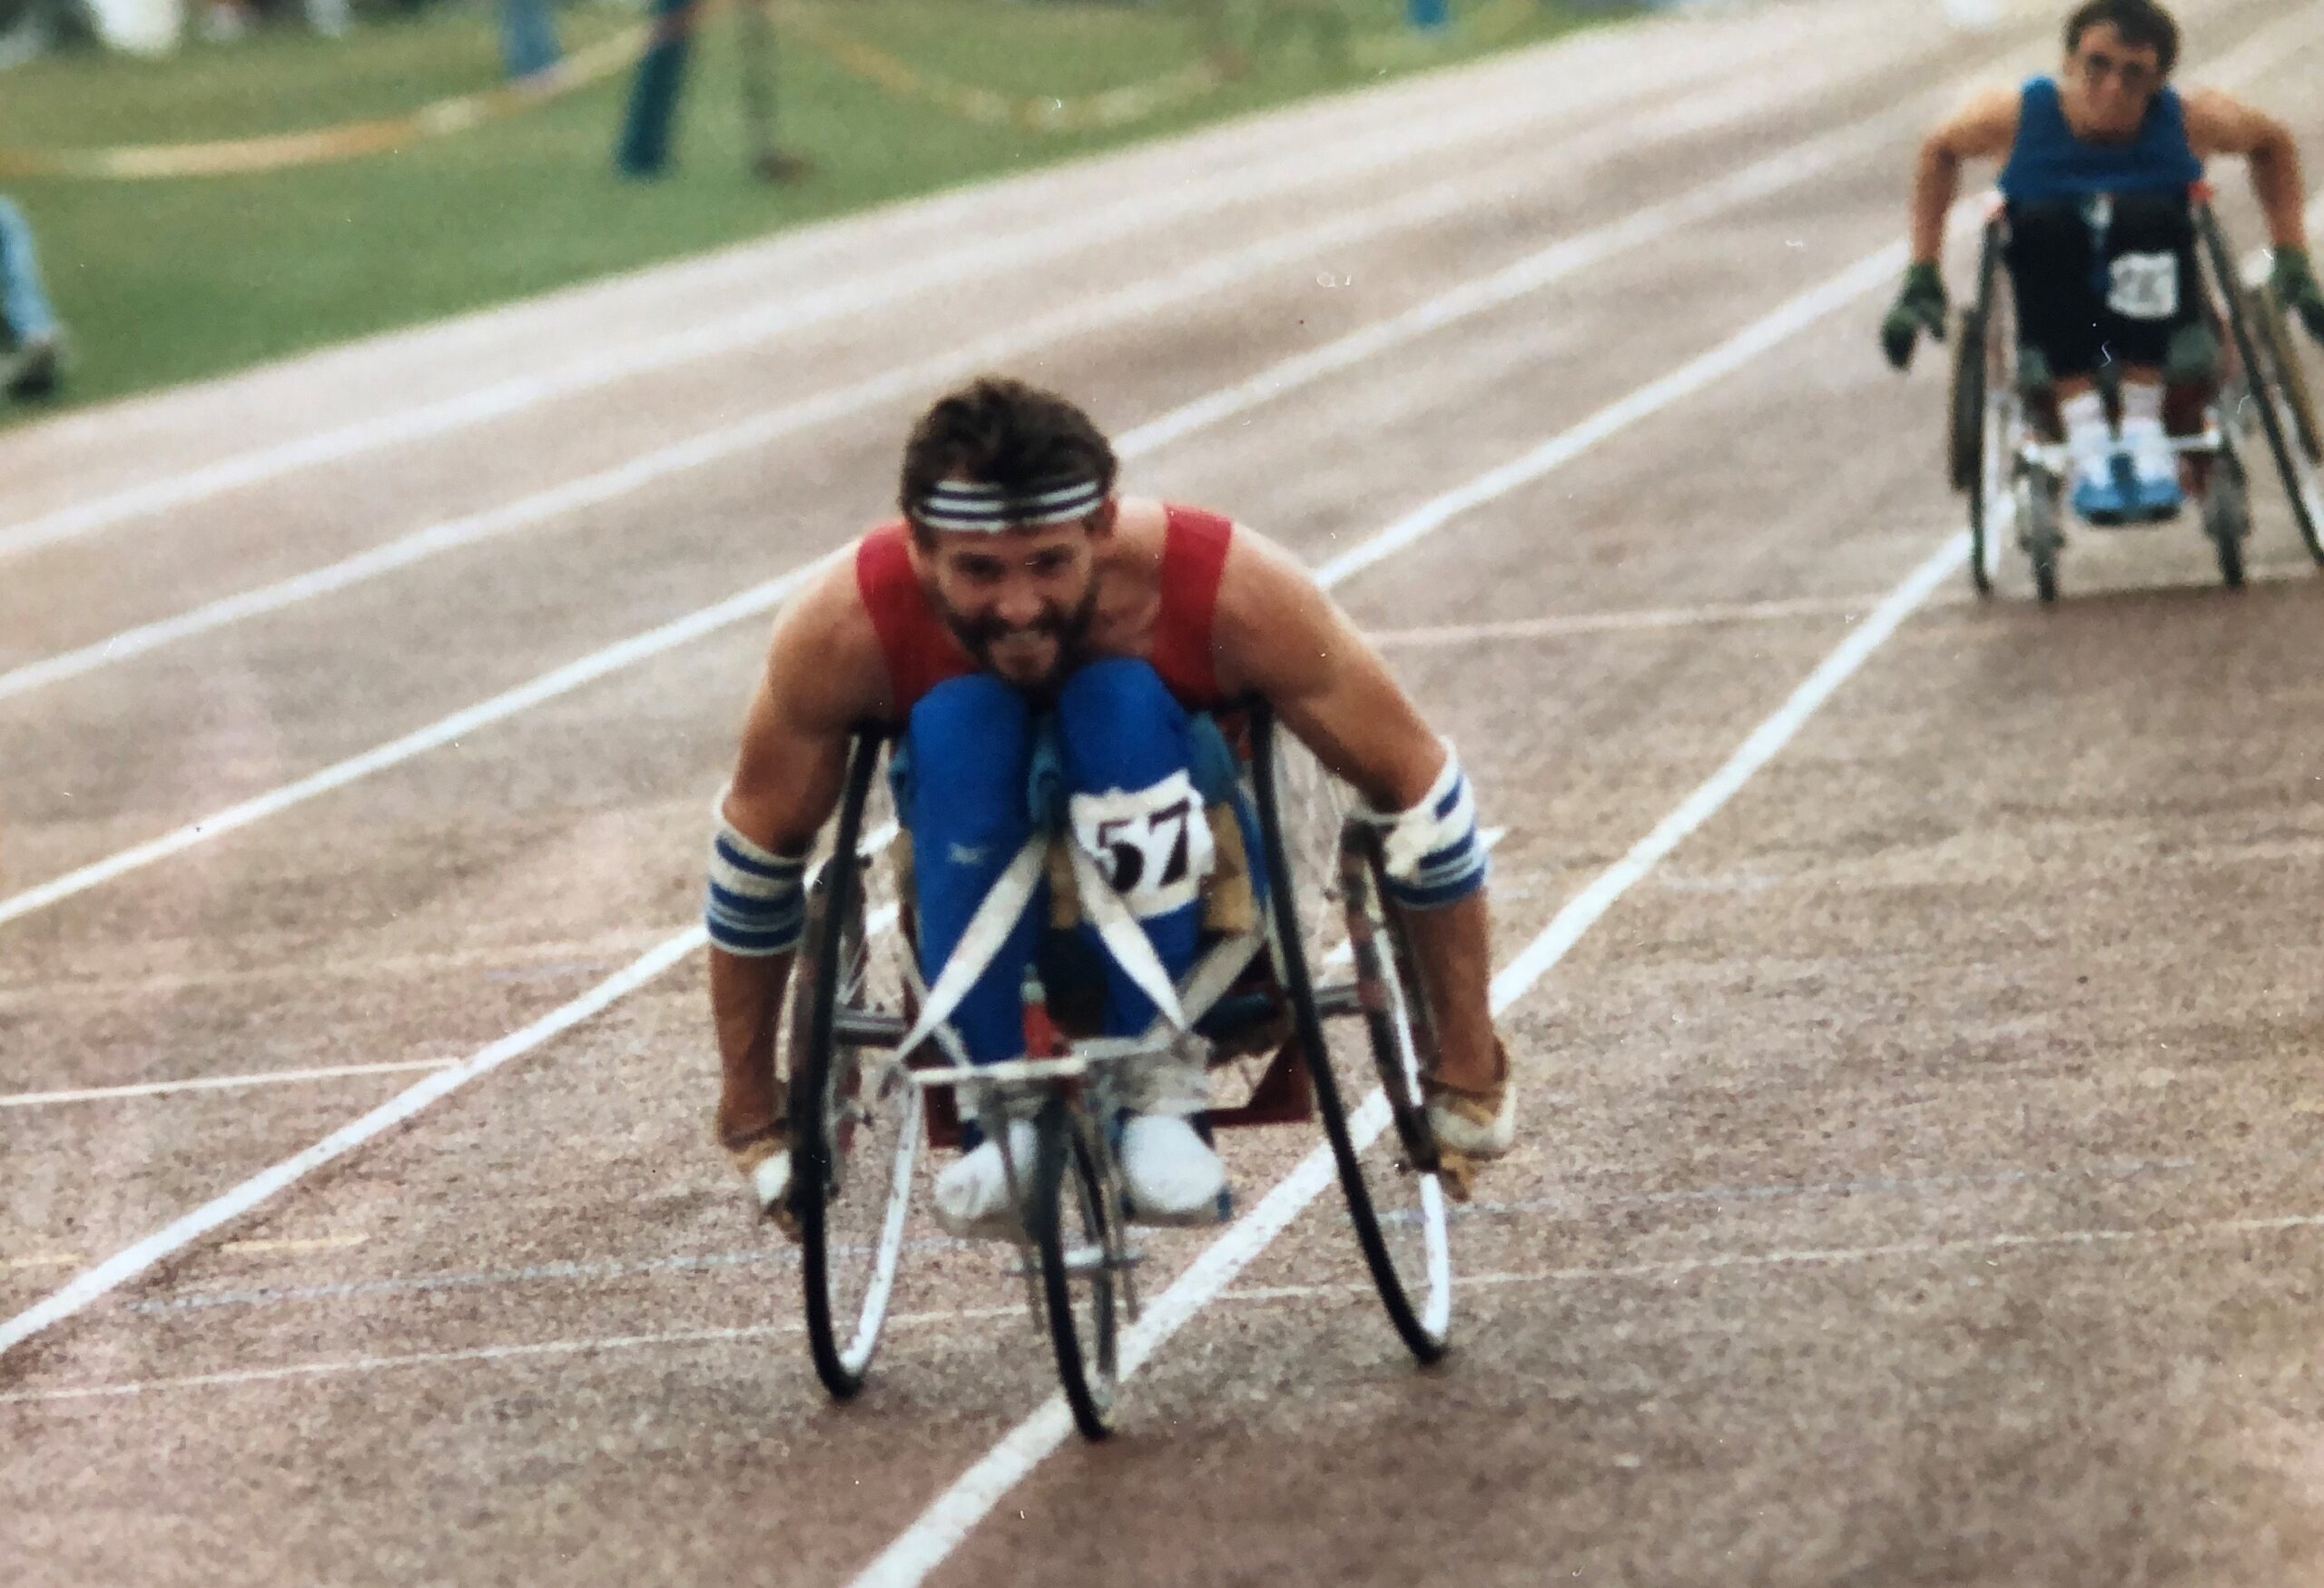 Paralympian Paul Clark competes in a wheelchair race.